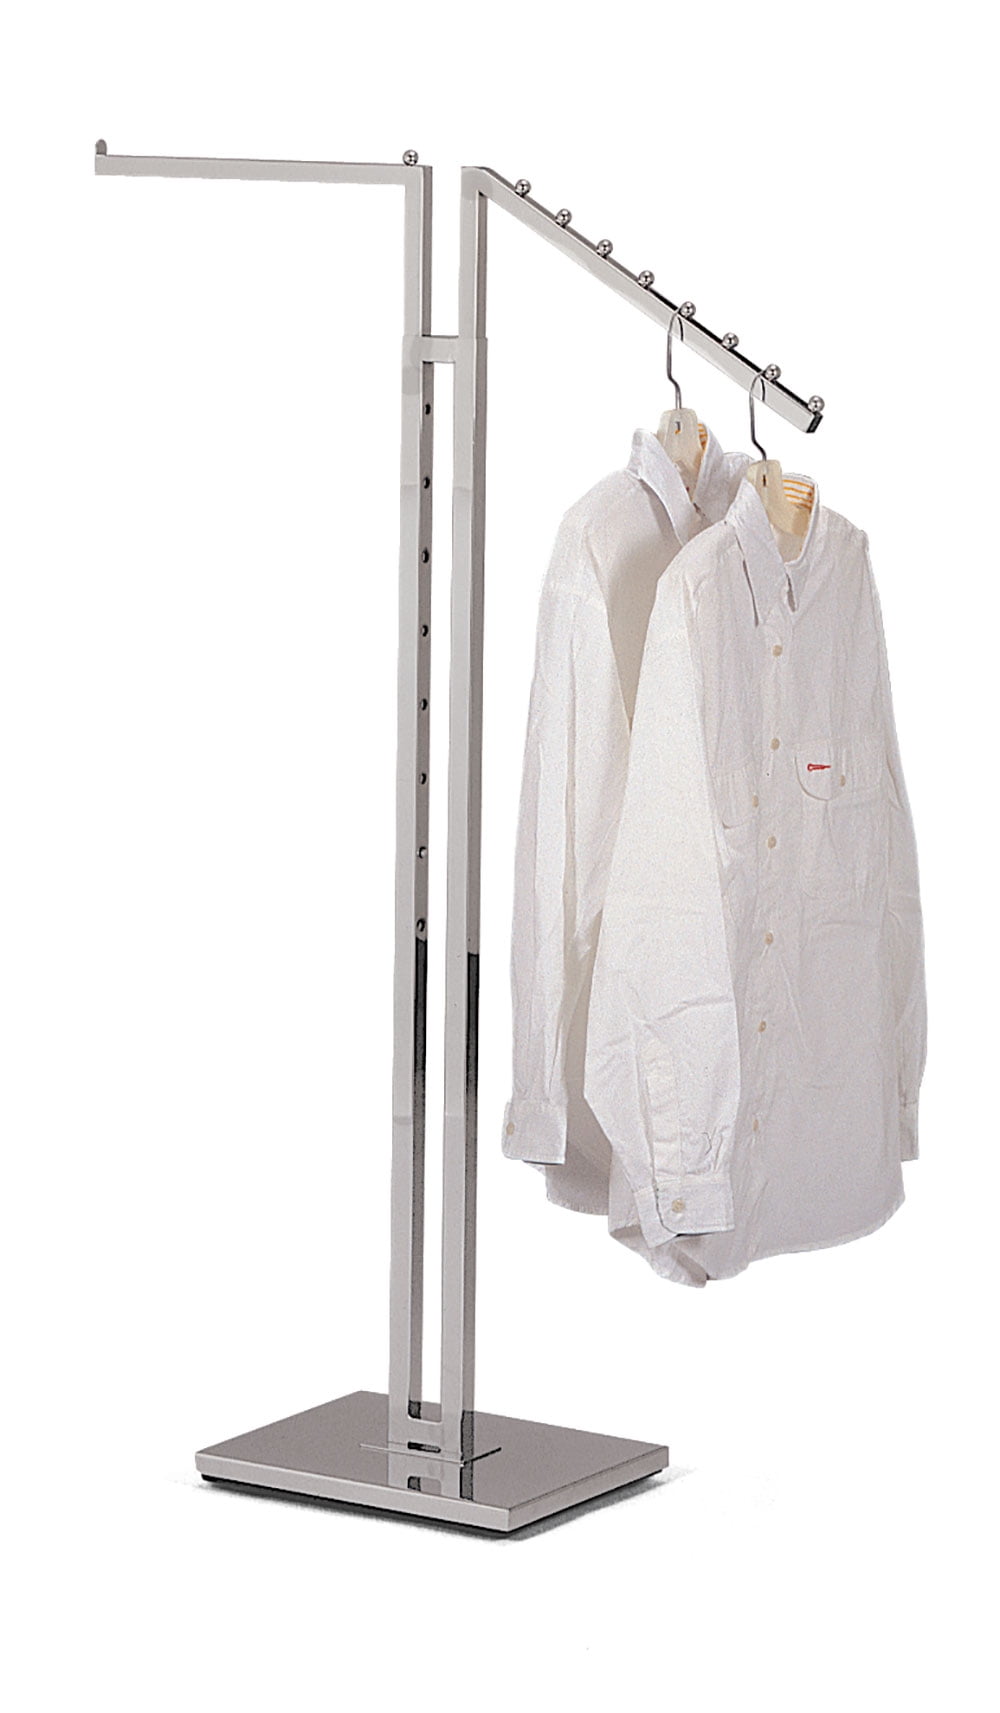 Clothing Rack Two Way 2 Straight Arms Clothes Adjustable Retail Display Silver 